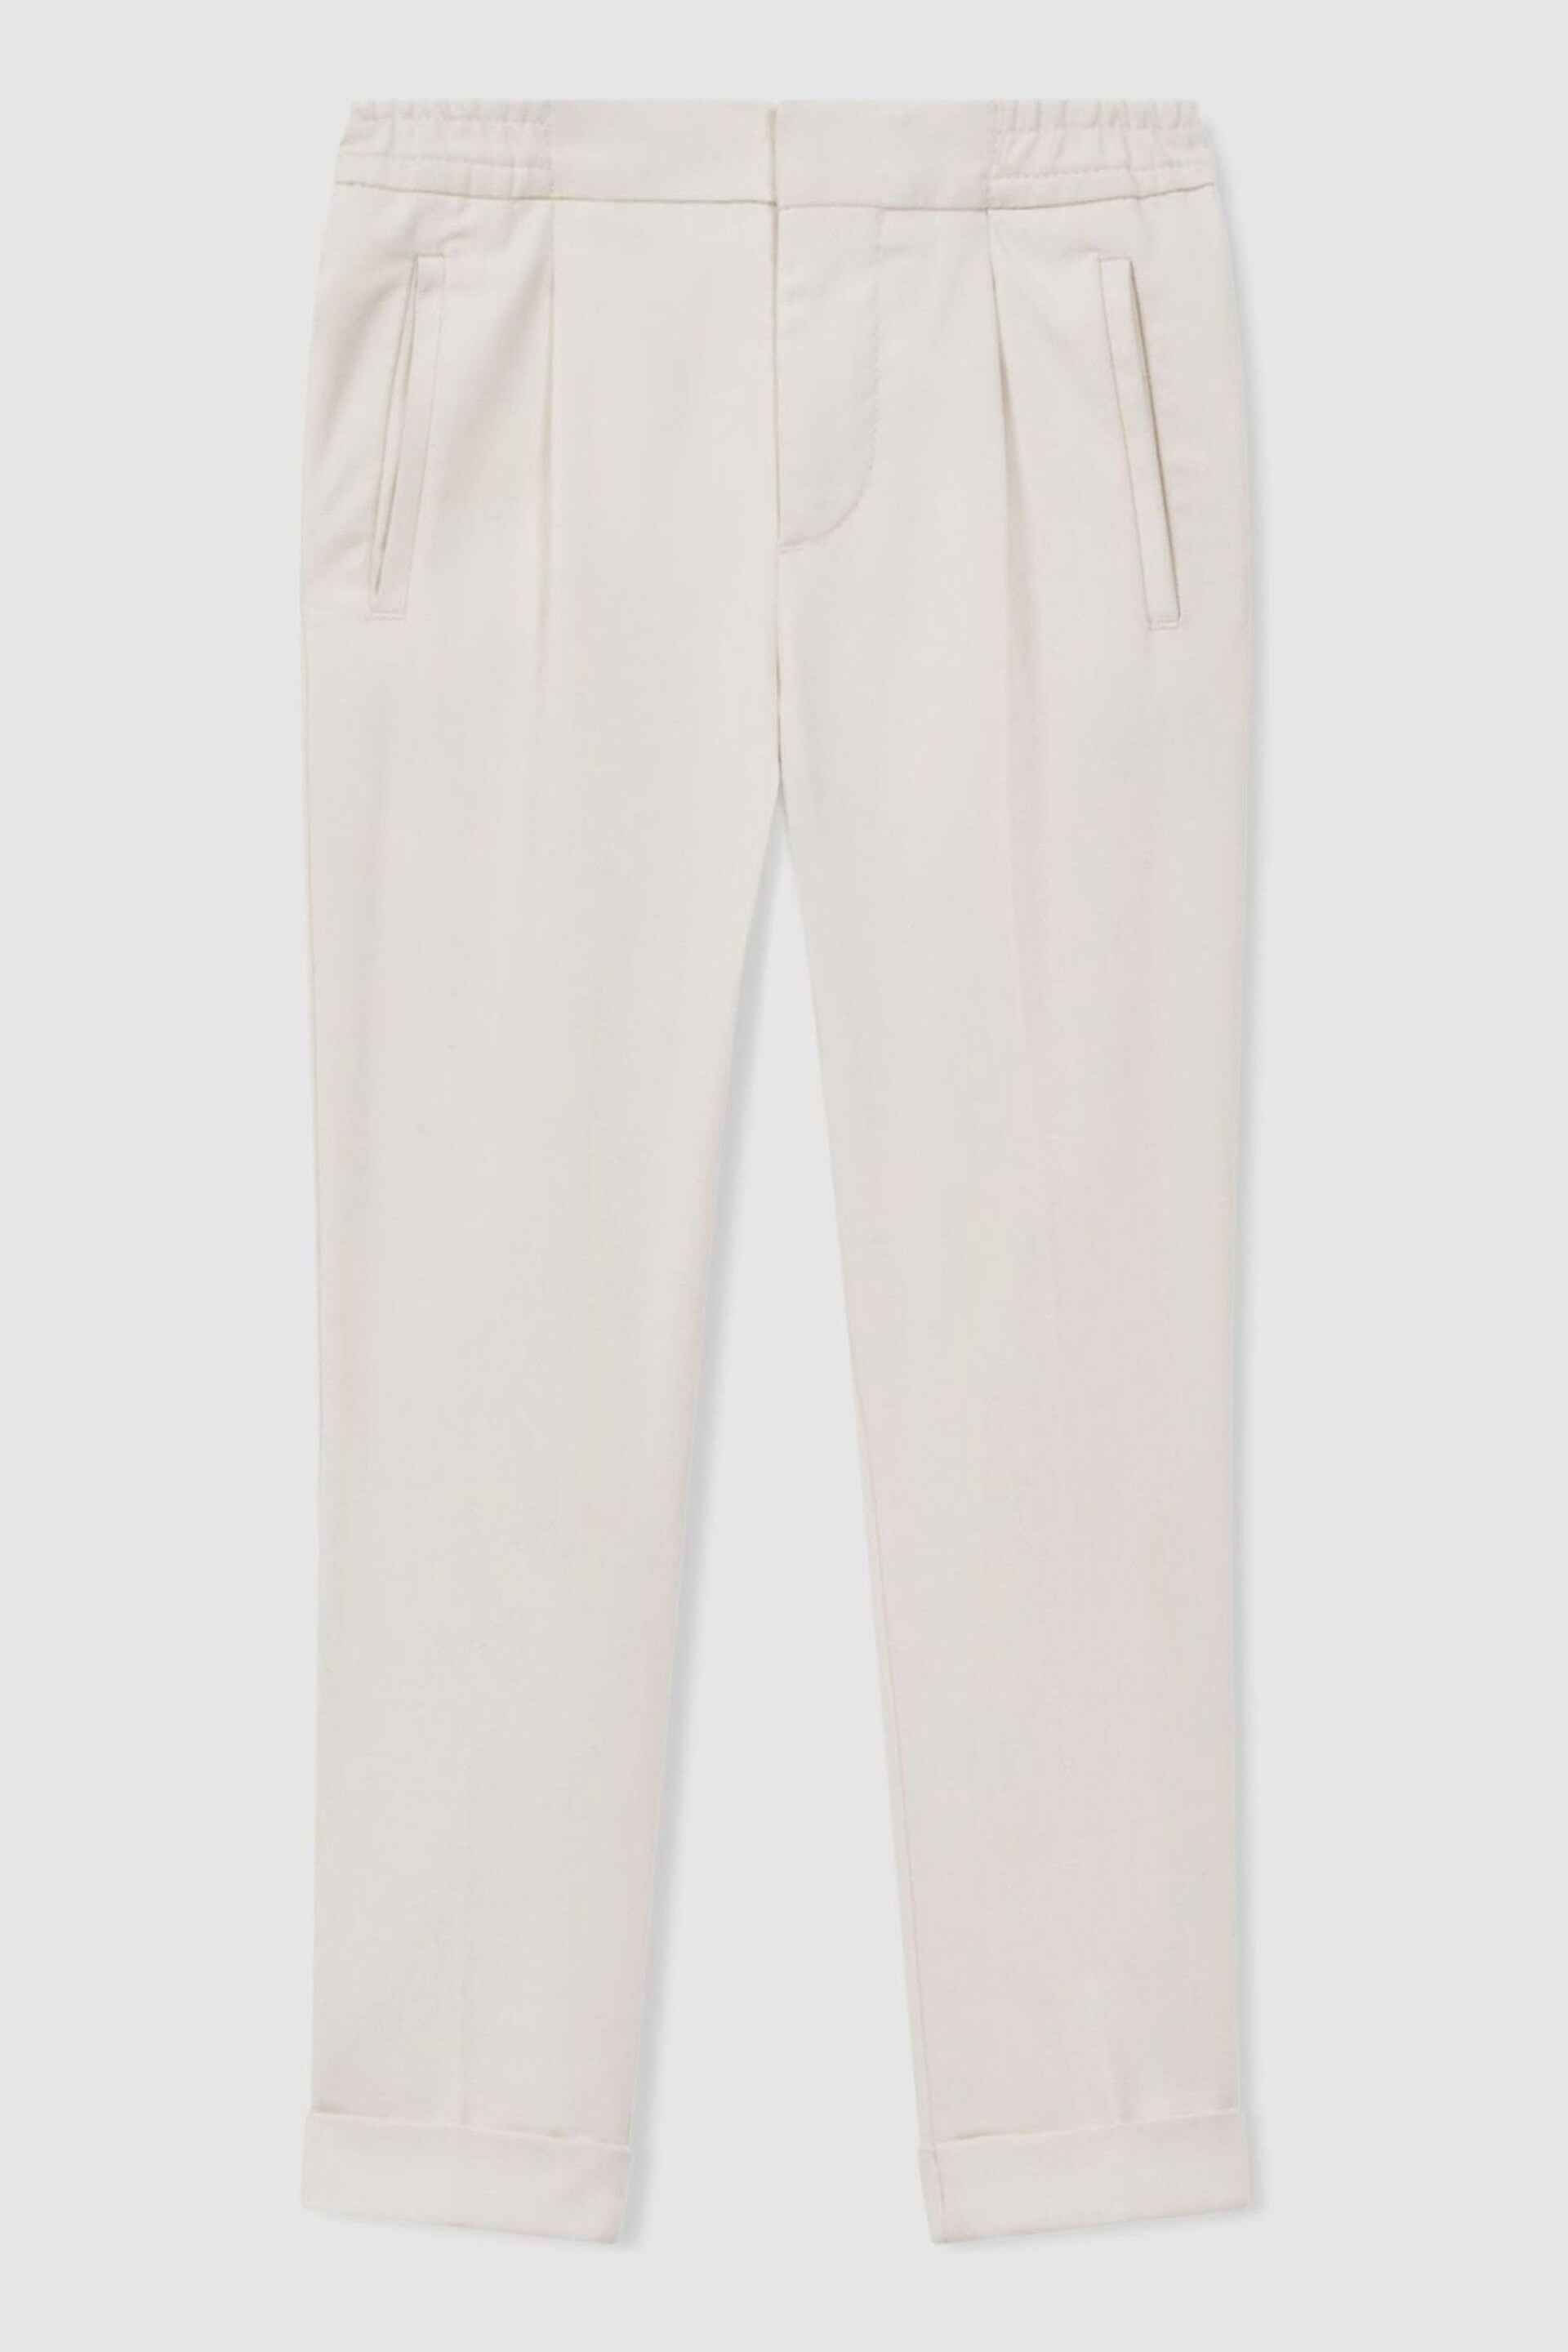 Reiss Ecru Brighton Senior Relaxed Elasticated Trousers with Turn-Ups - Image 2 of 5